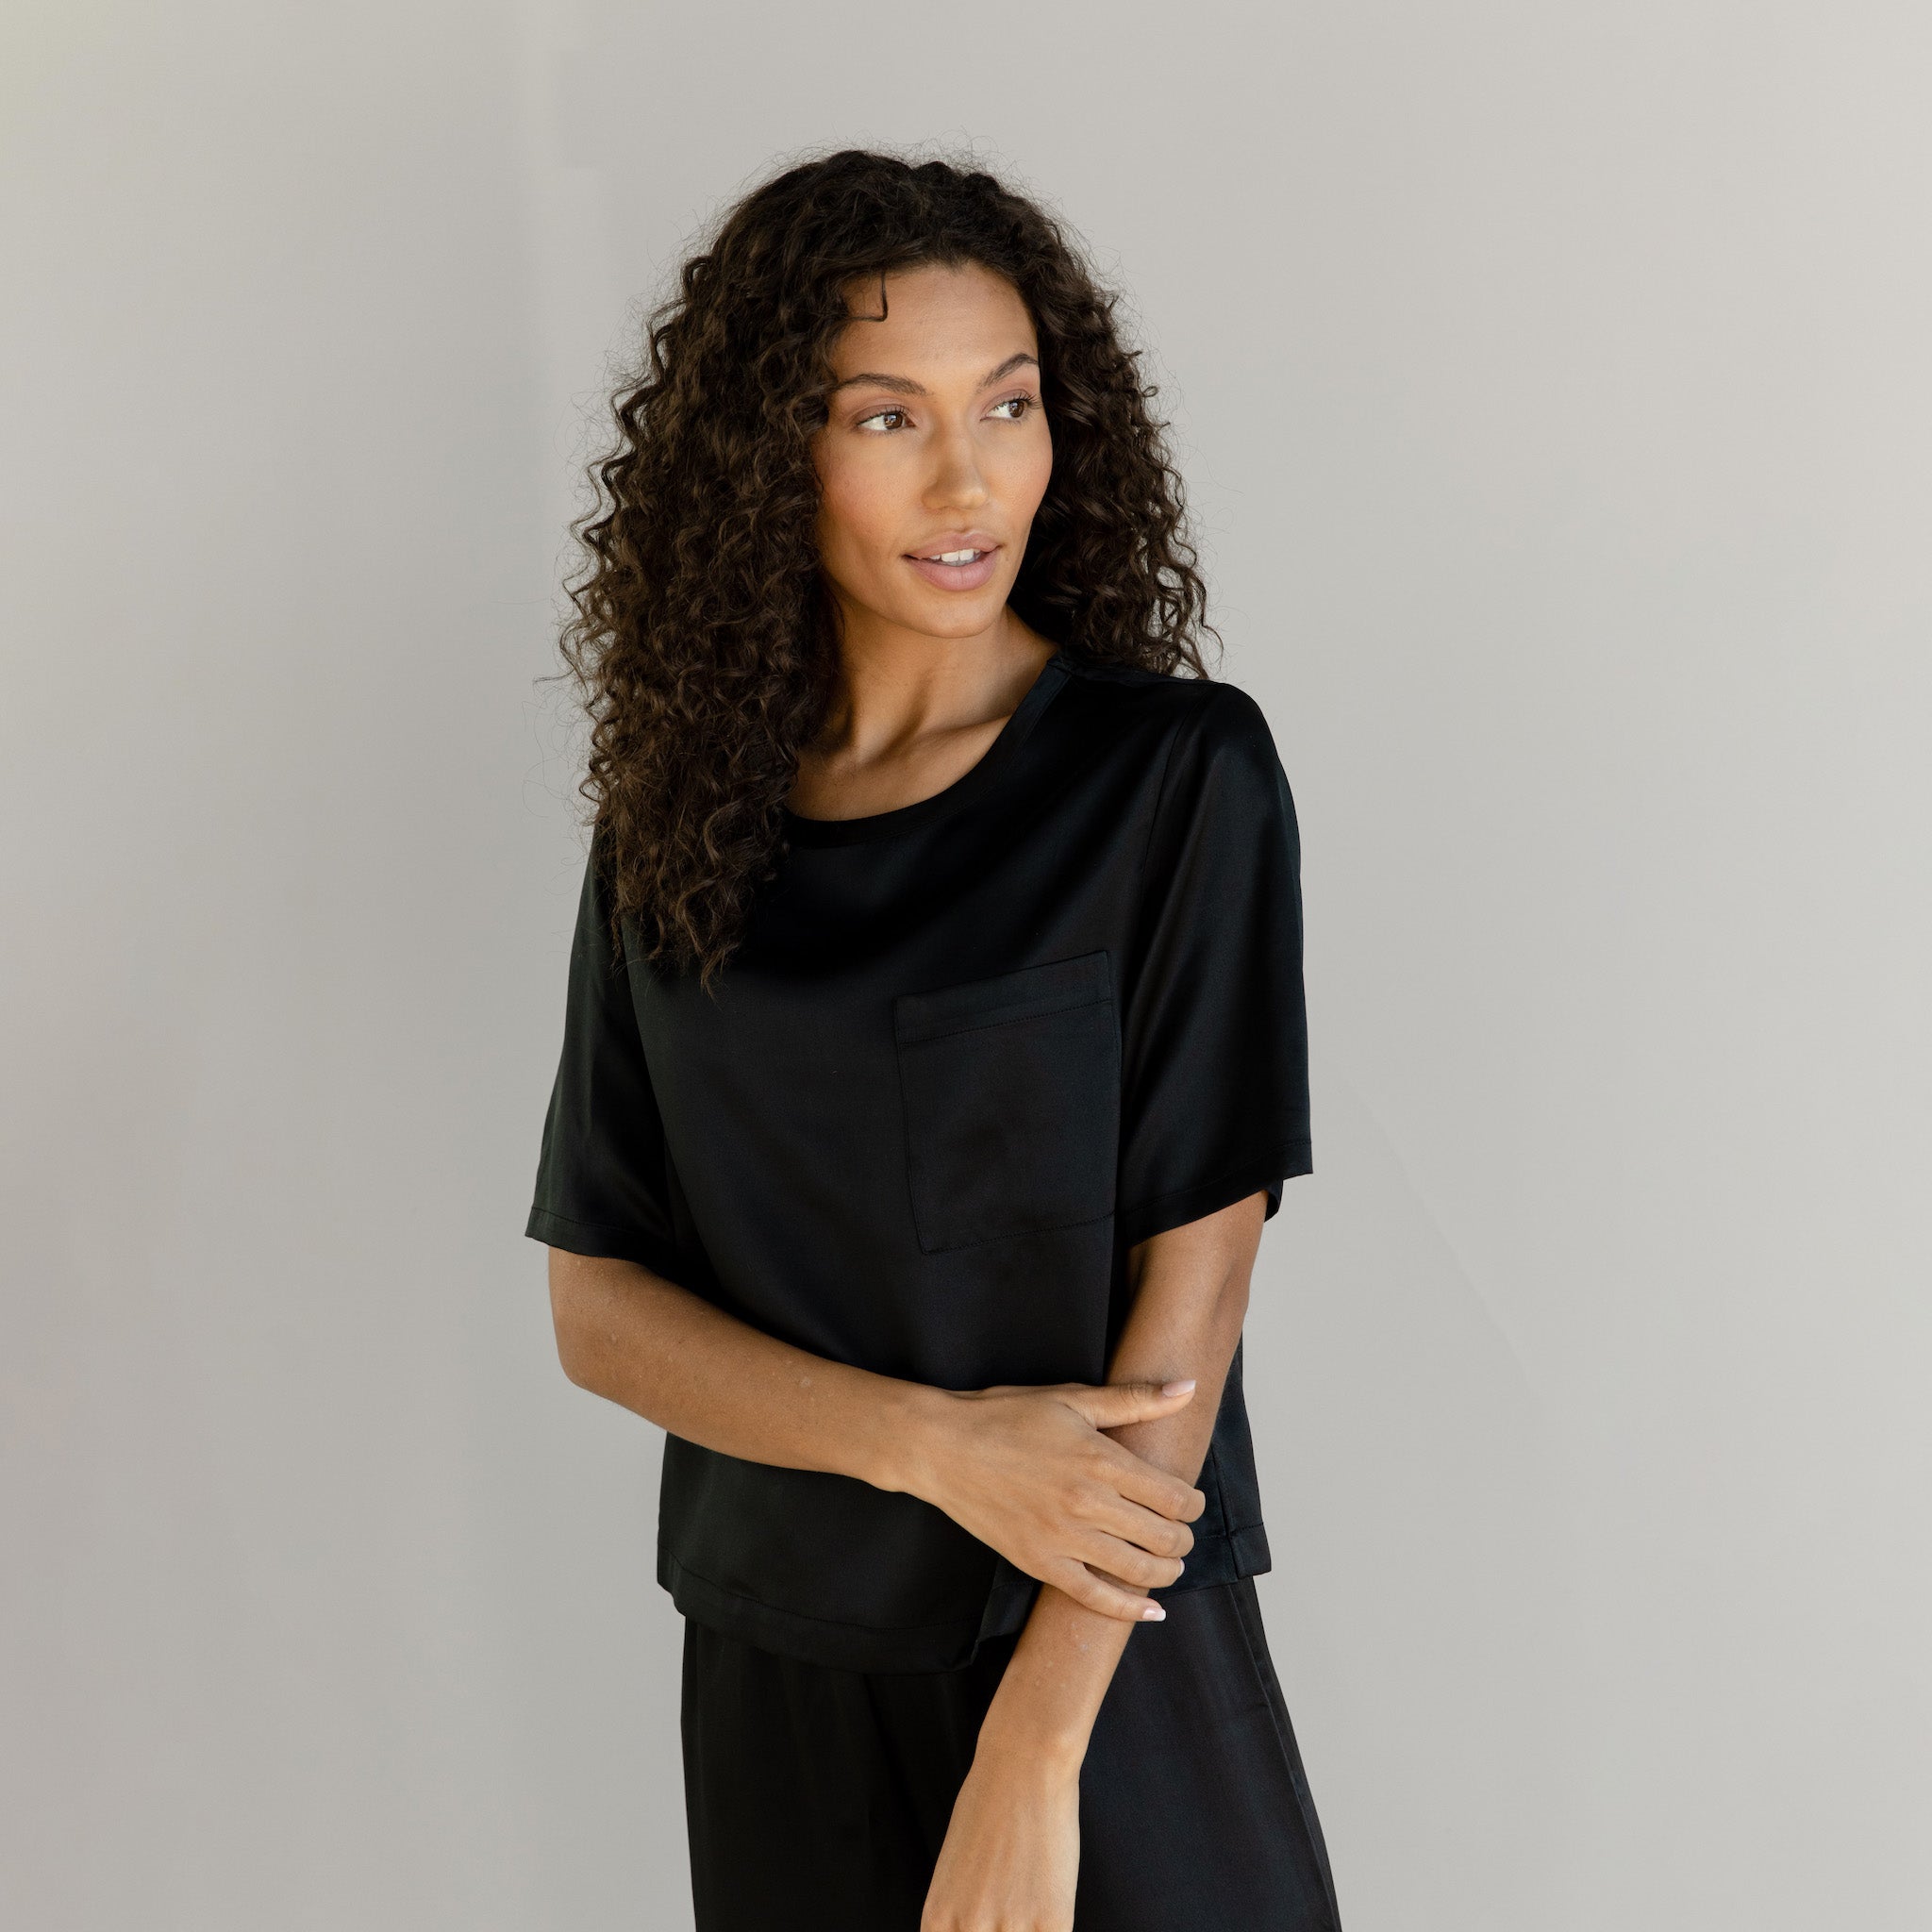 Black Serenity Silk Scoop Neck Tee modeled by a woman. The photo was taken in a high contrast setting, showing off the colors and lines of the tee. |Color: Black